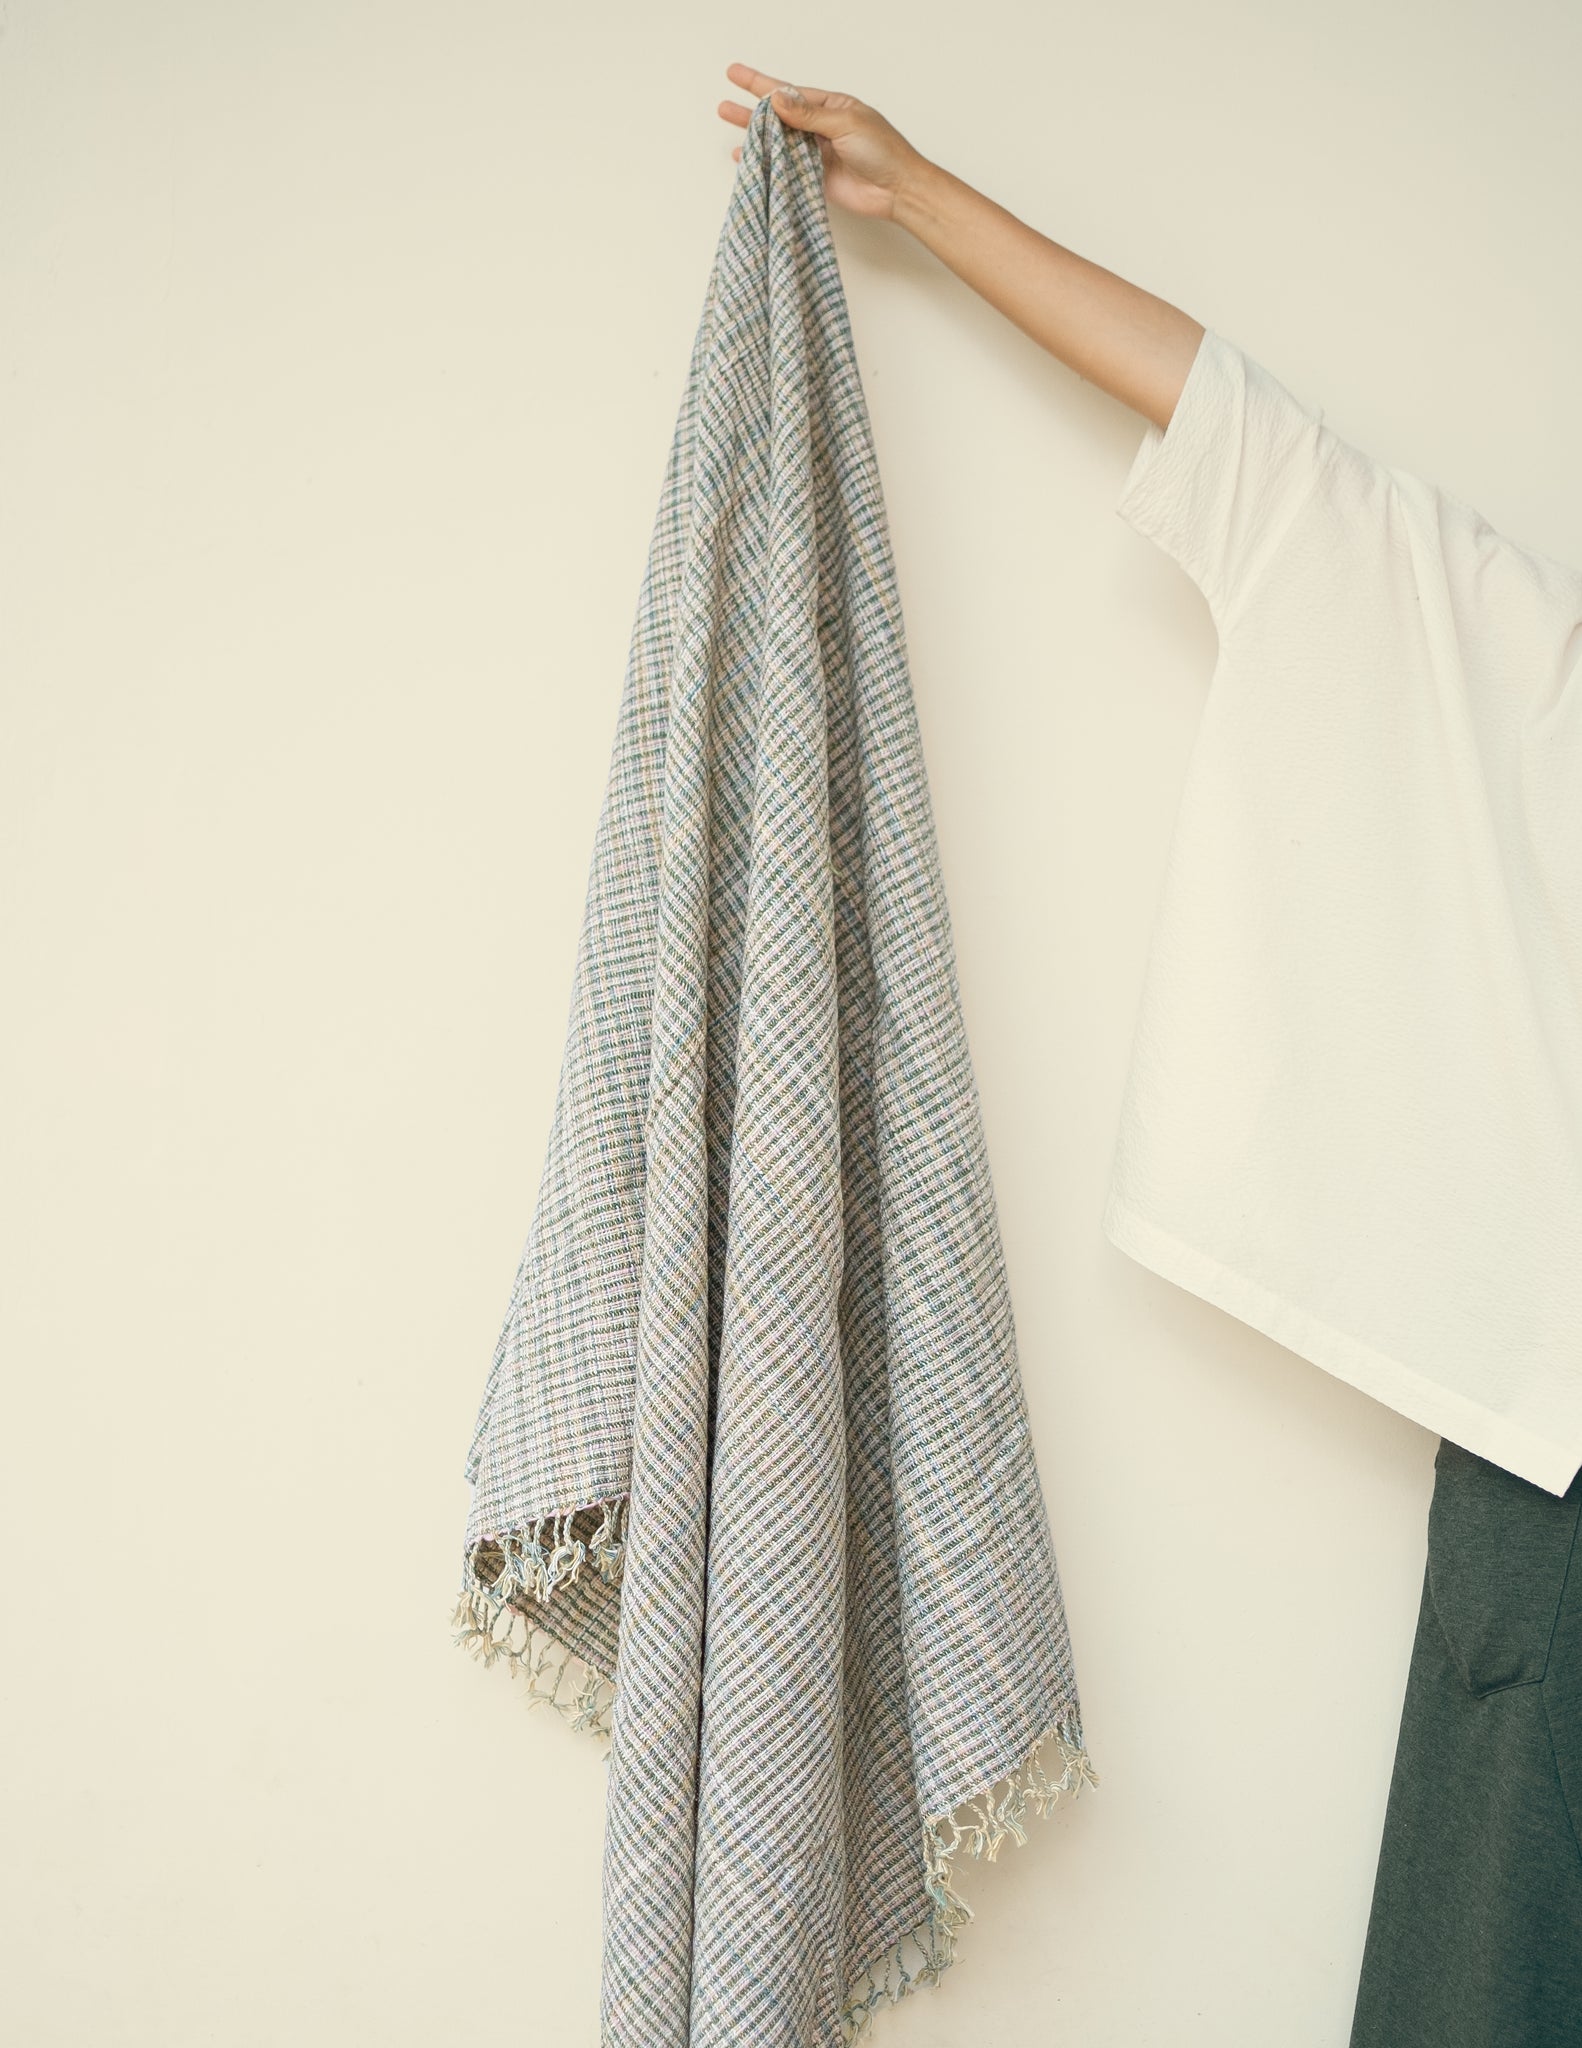 The Natural Dyed Throw (Pastel Checks)